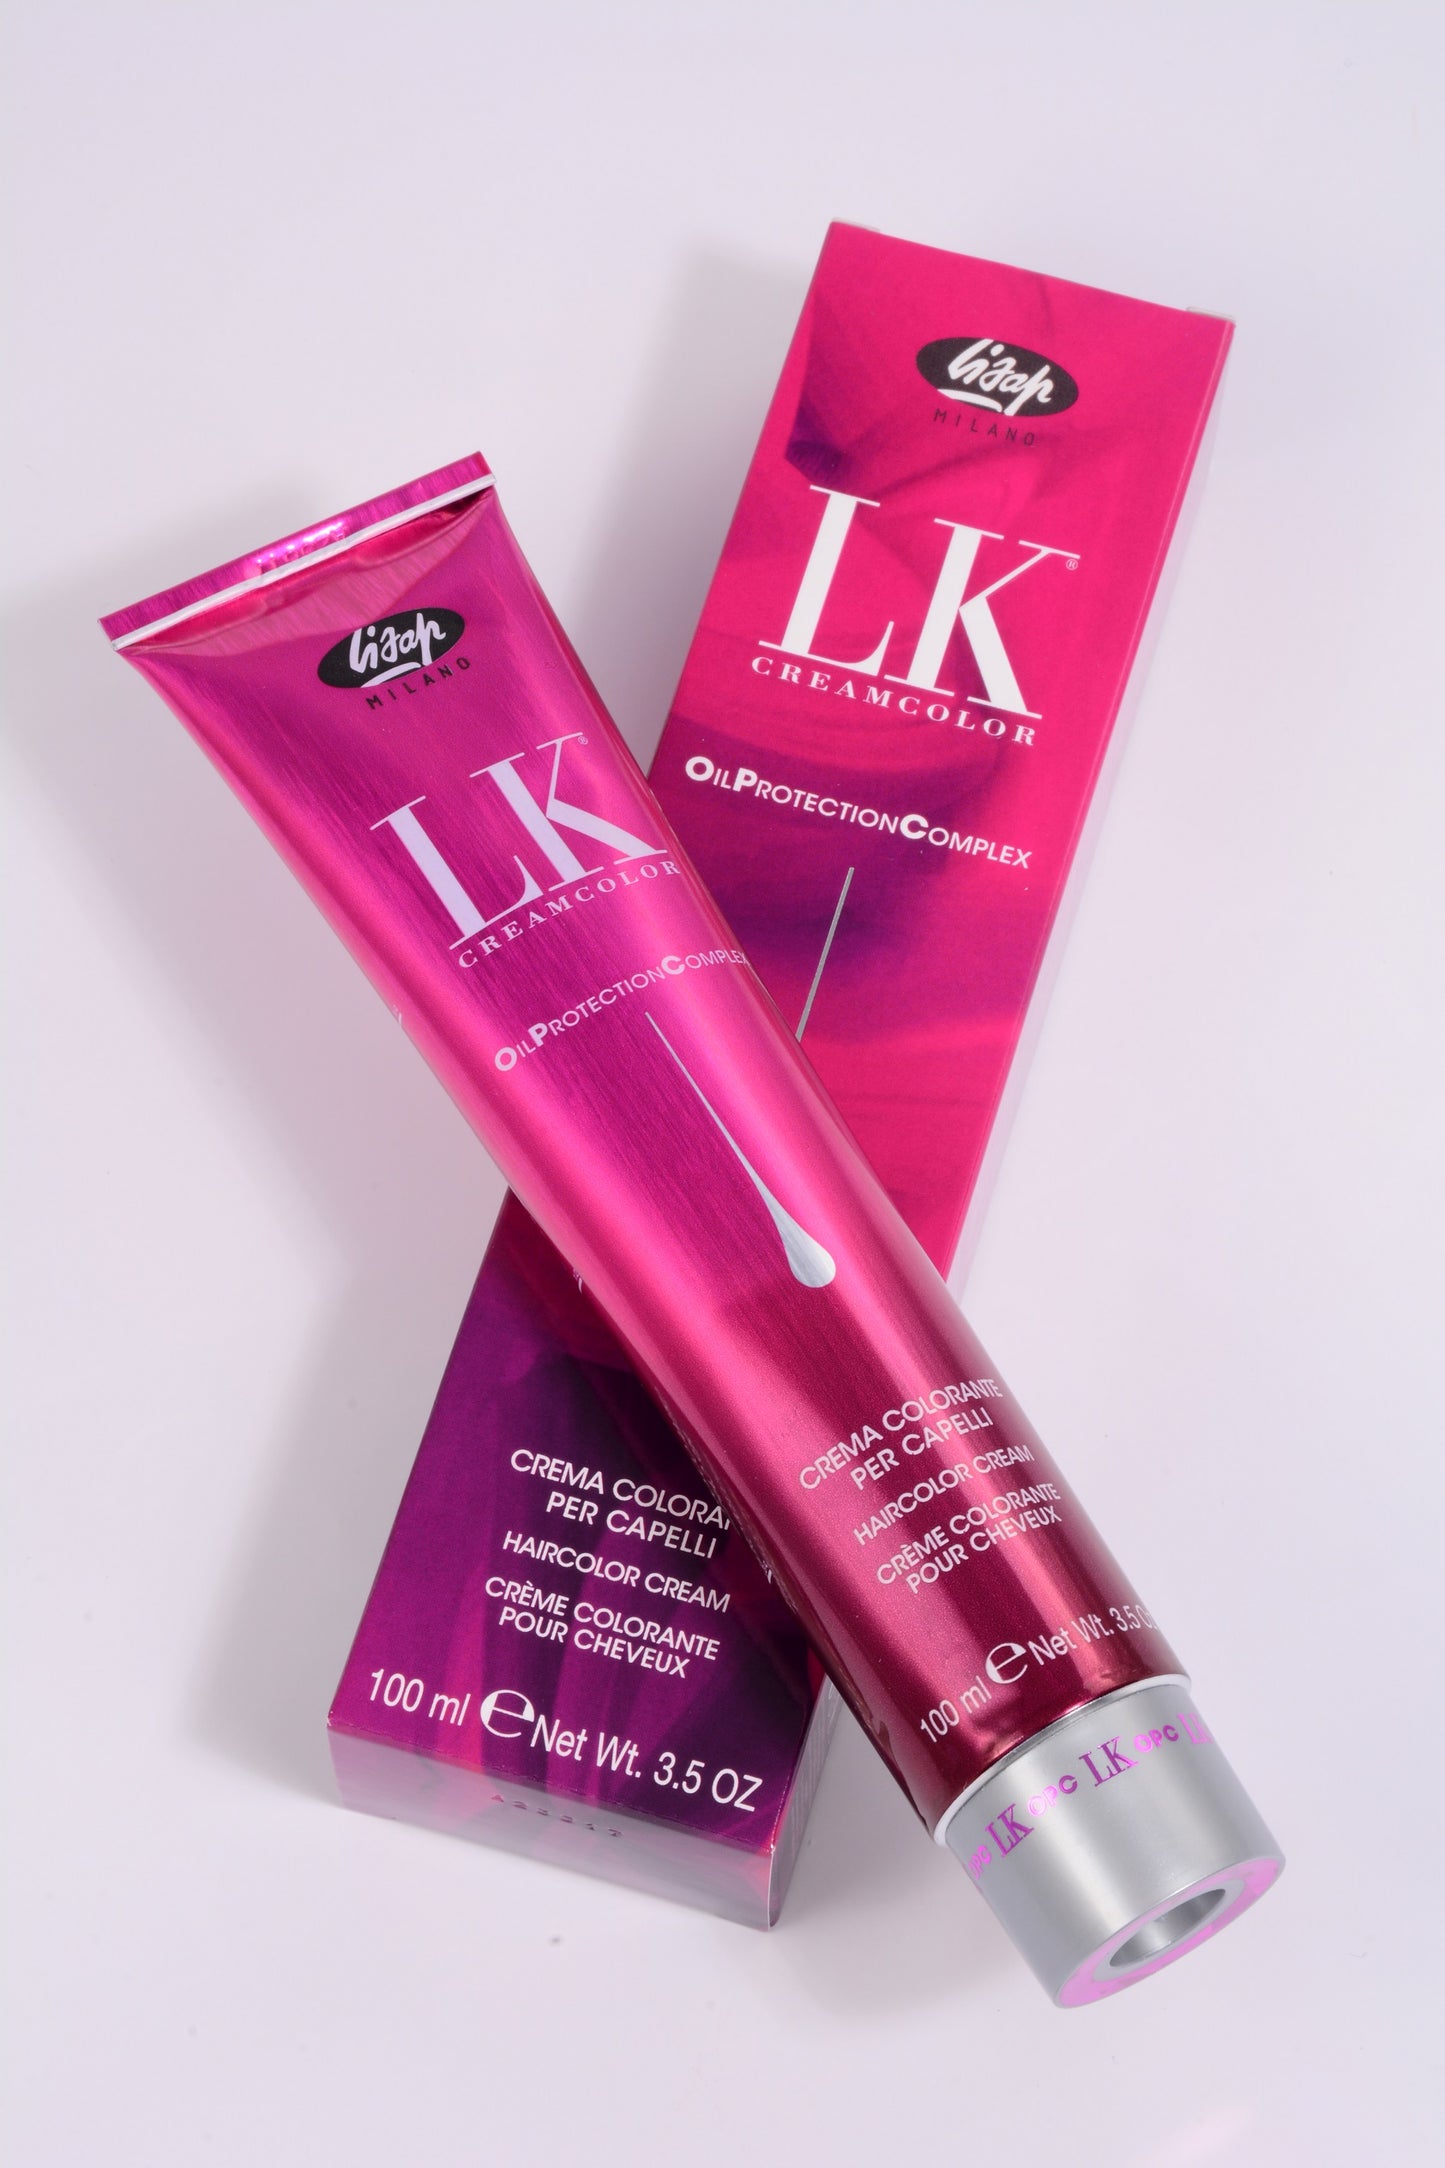 LK Creamcolor 6/76 Oil Protection Complex